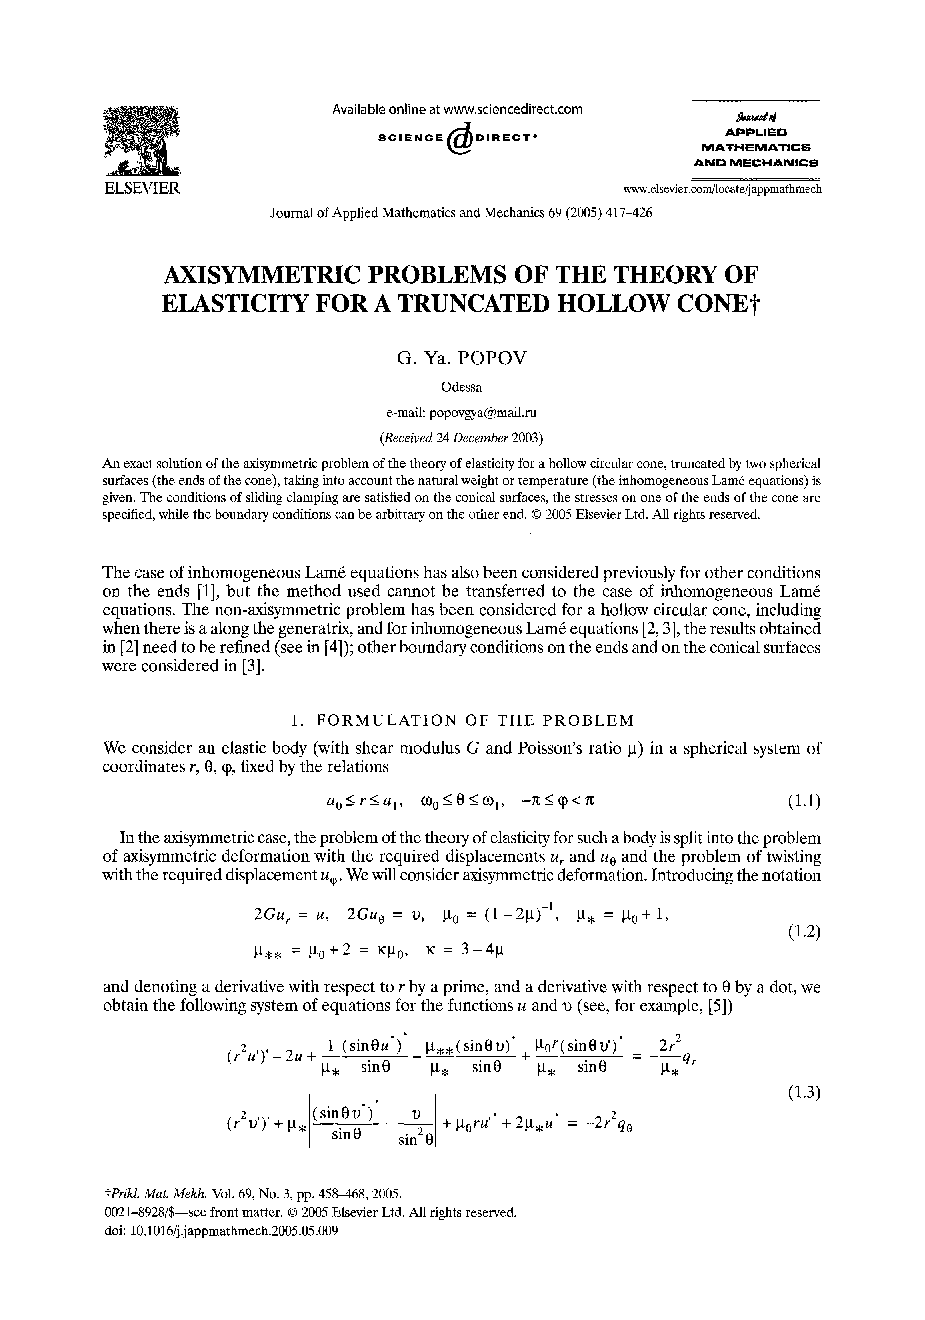 Axisymmetric problems of the theory of elasticity for a truncated hollow cone